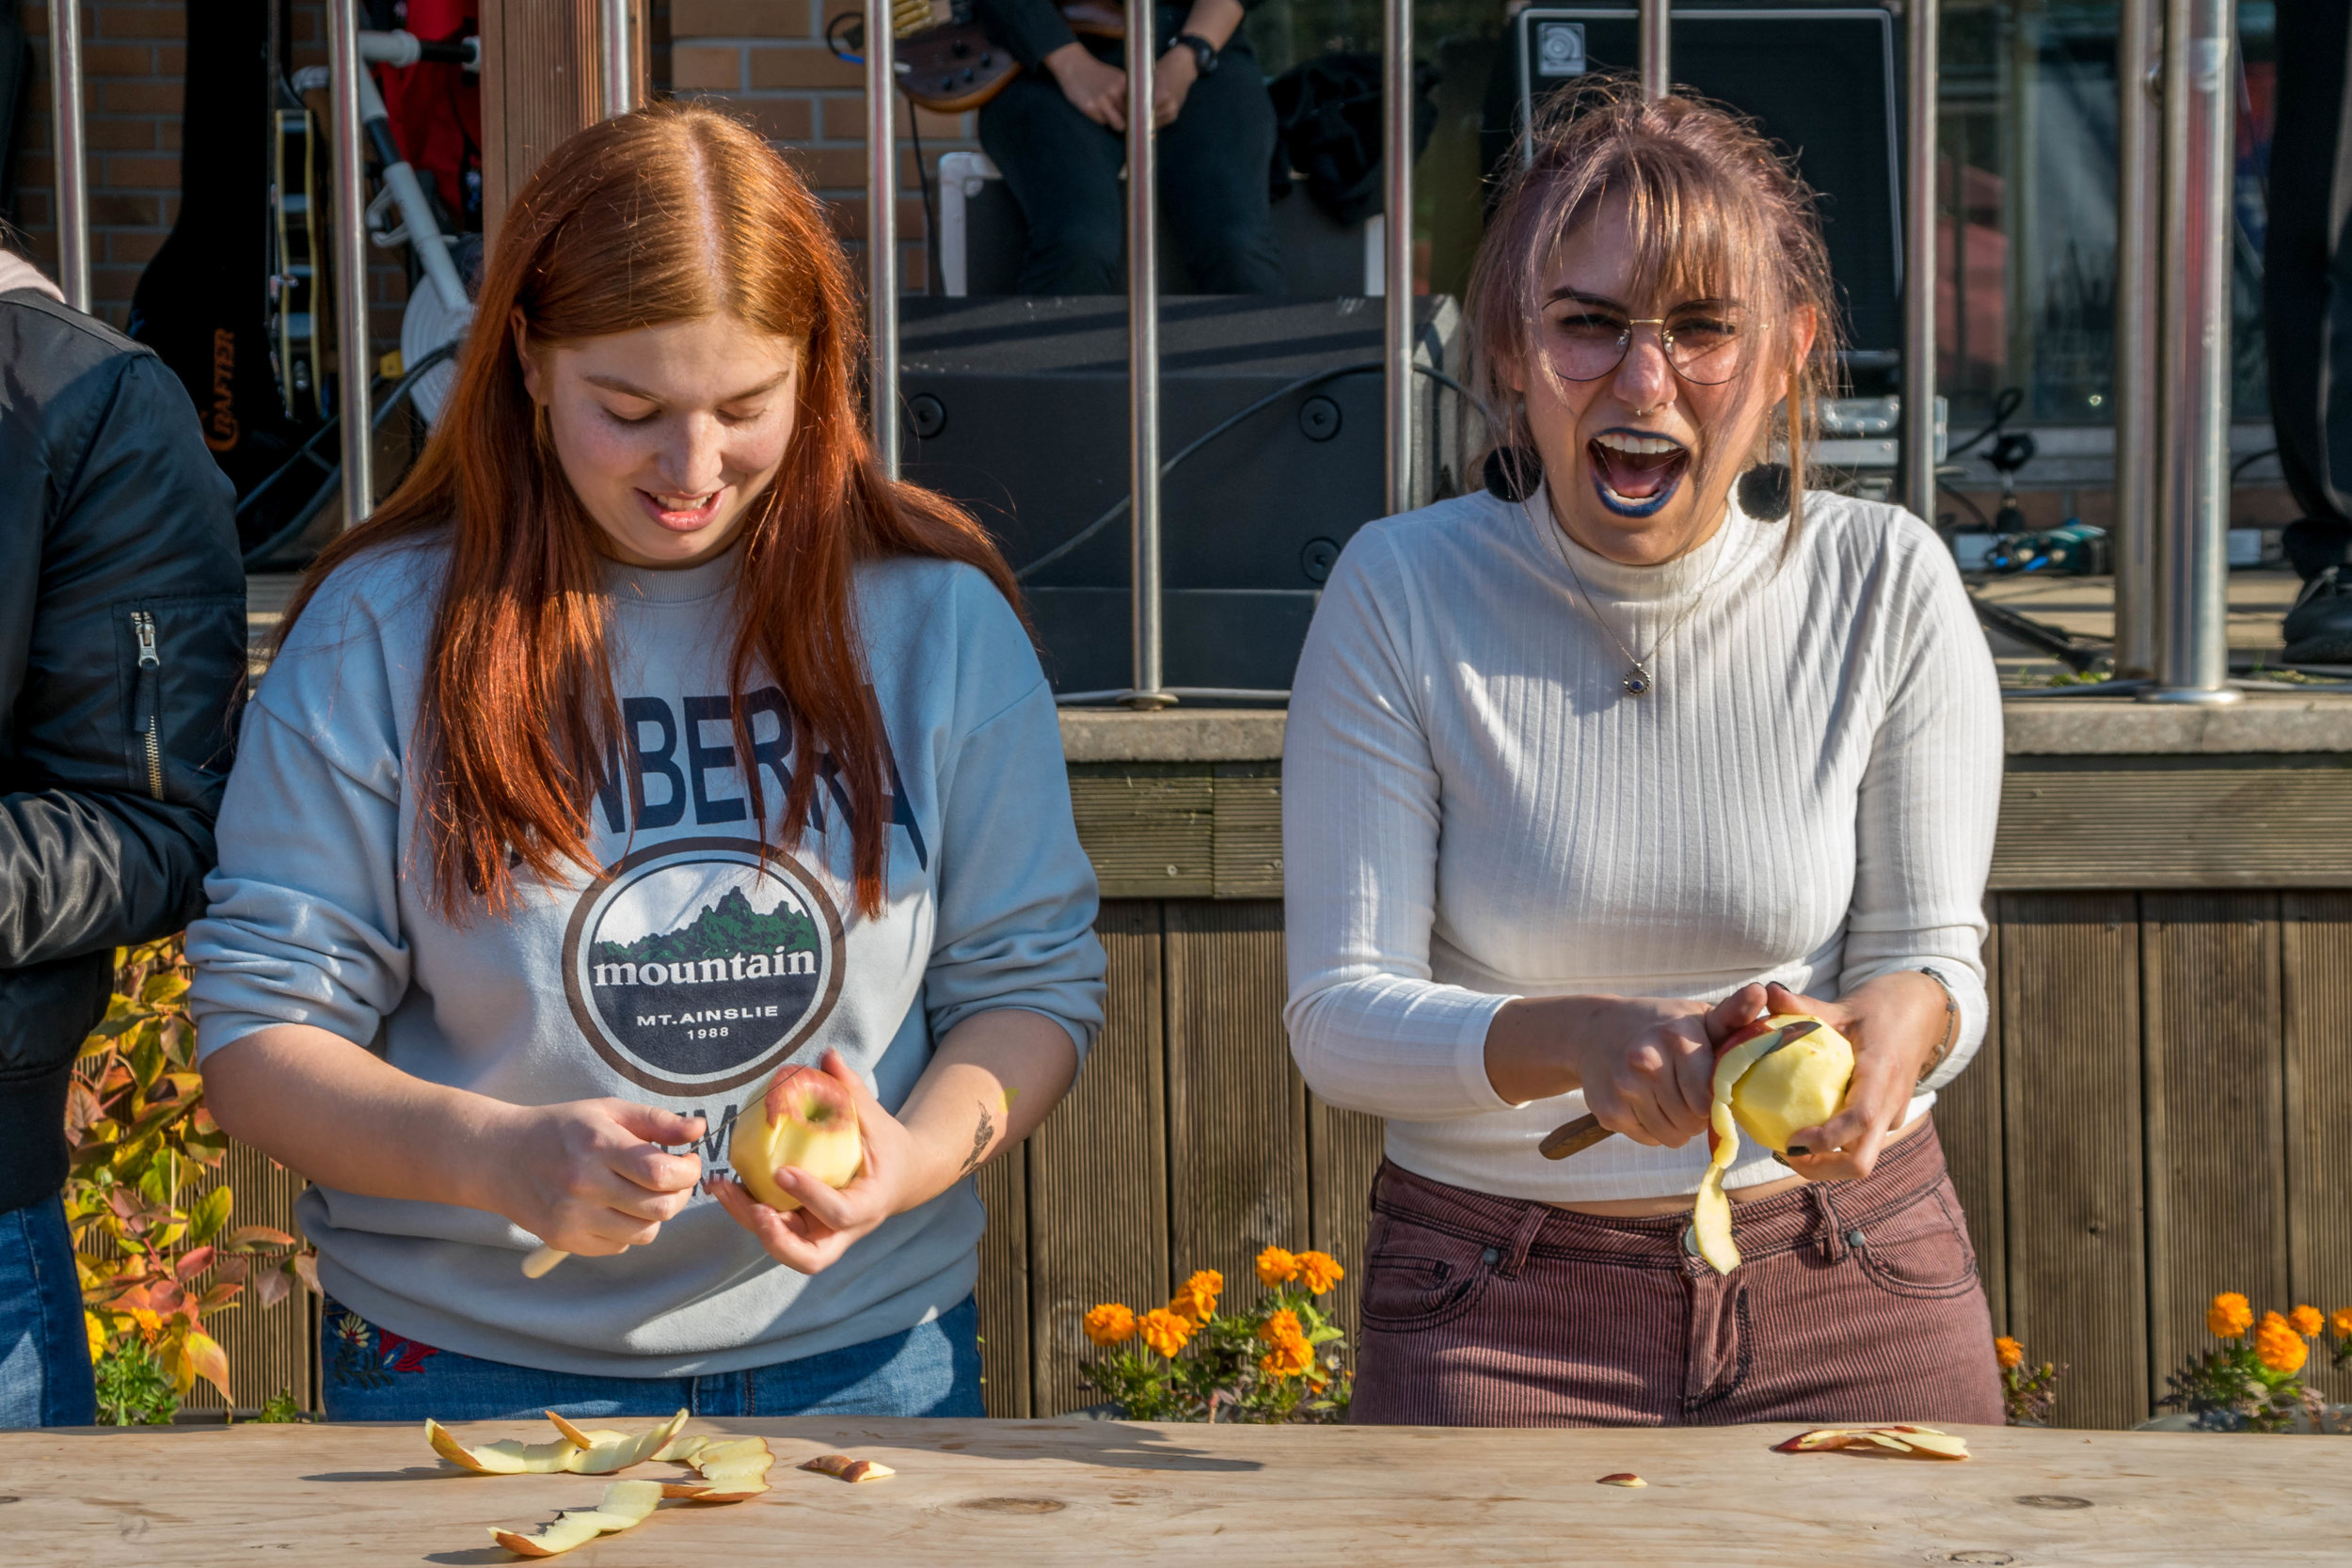  Sofia (right) entered the apple peeling contest. Whoever could peel the longest string of apple won. Unfortunately, she was far from winning haha. 